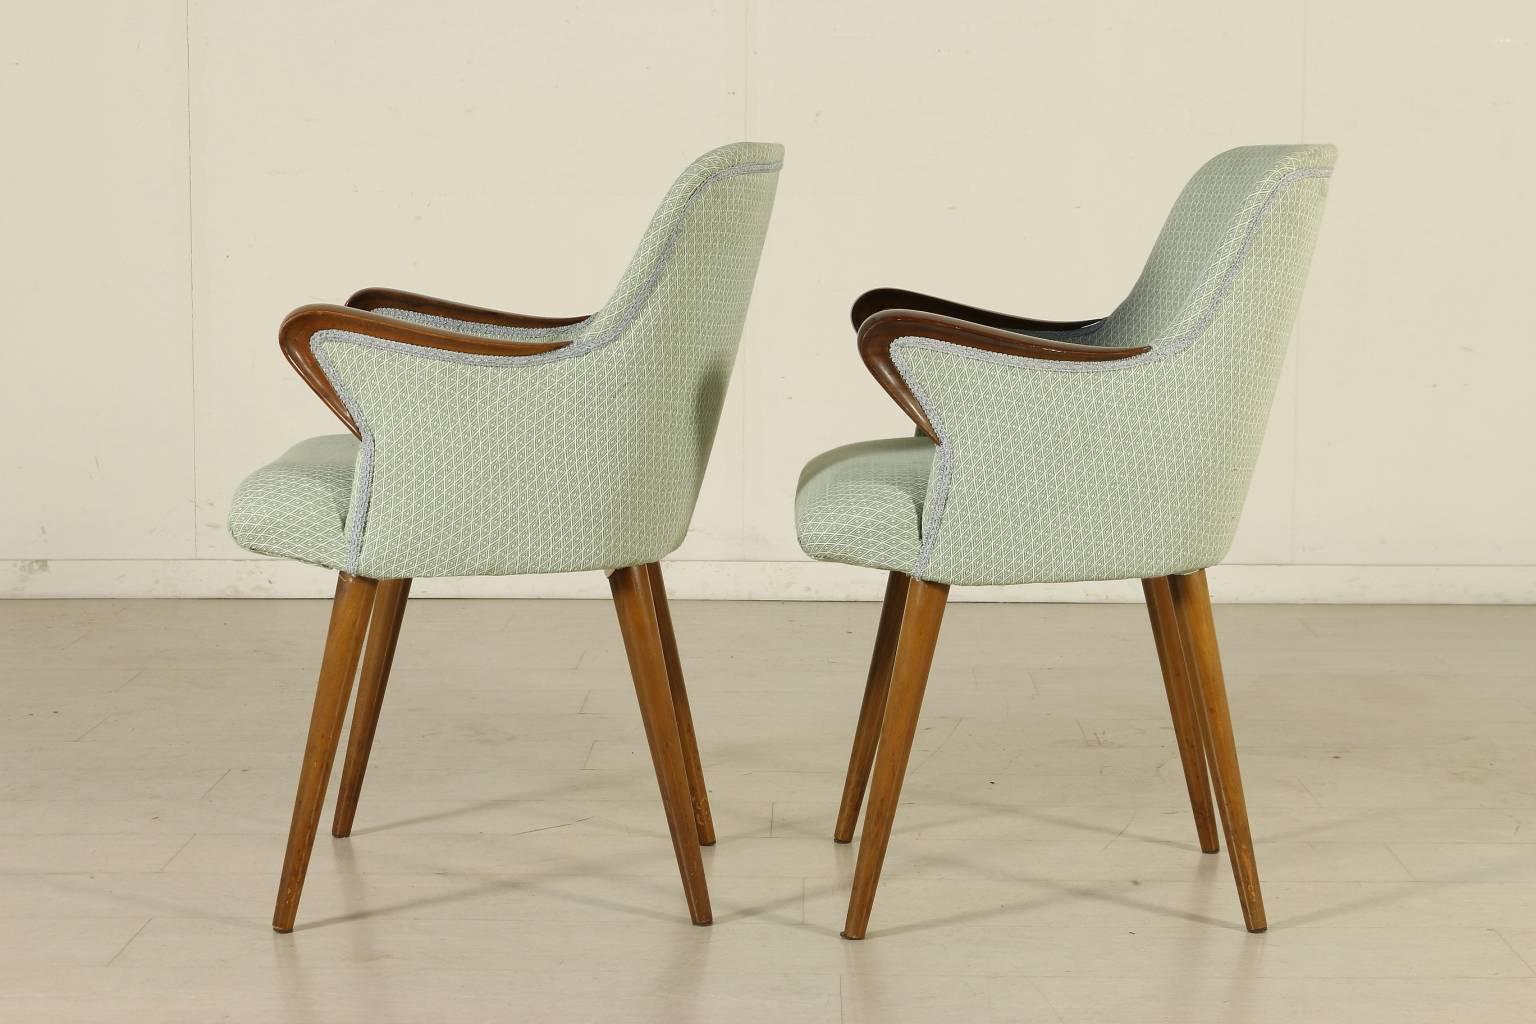 A pair of chairs designed by Osvaldo Borsani for Tecno, P38 model. Foam padding, fabric upholstery and stained beechwood. Manufactured in Italy, 1950s.